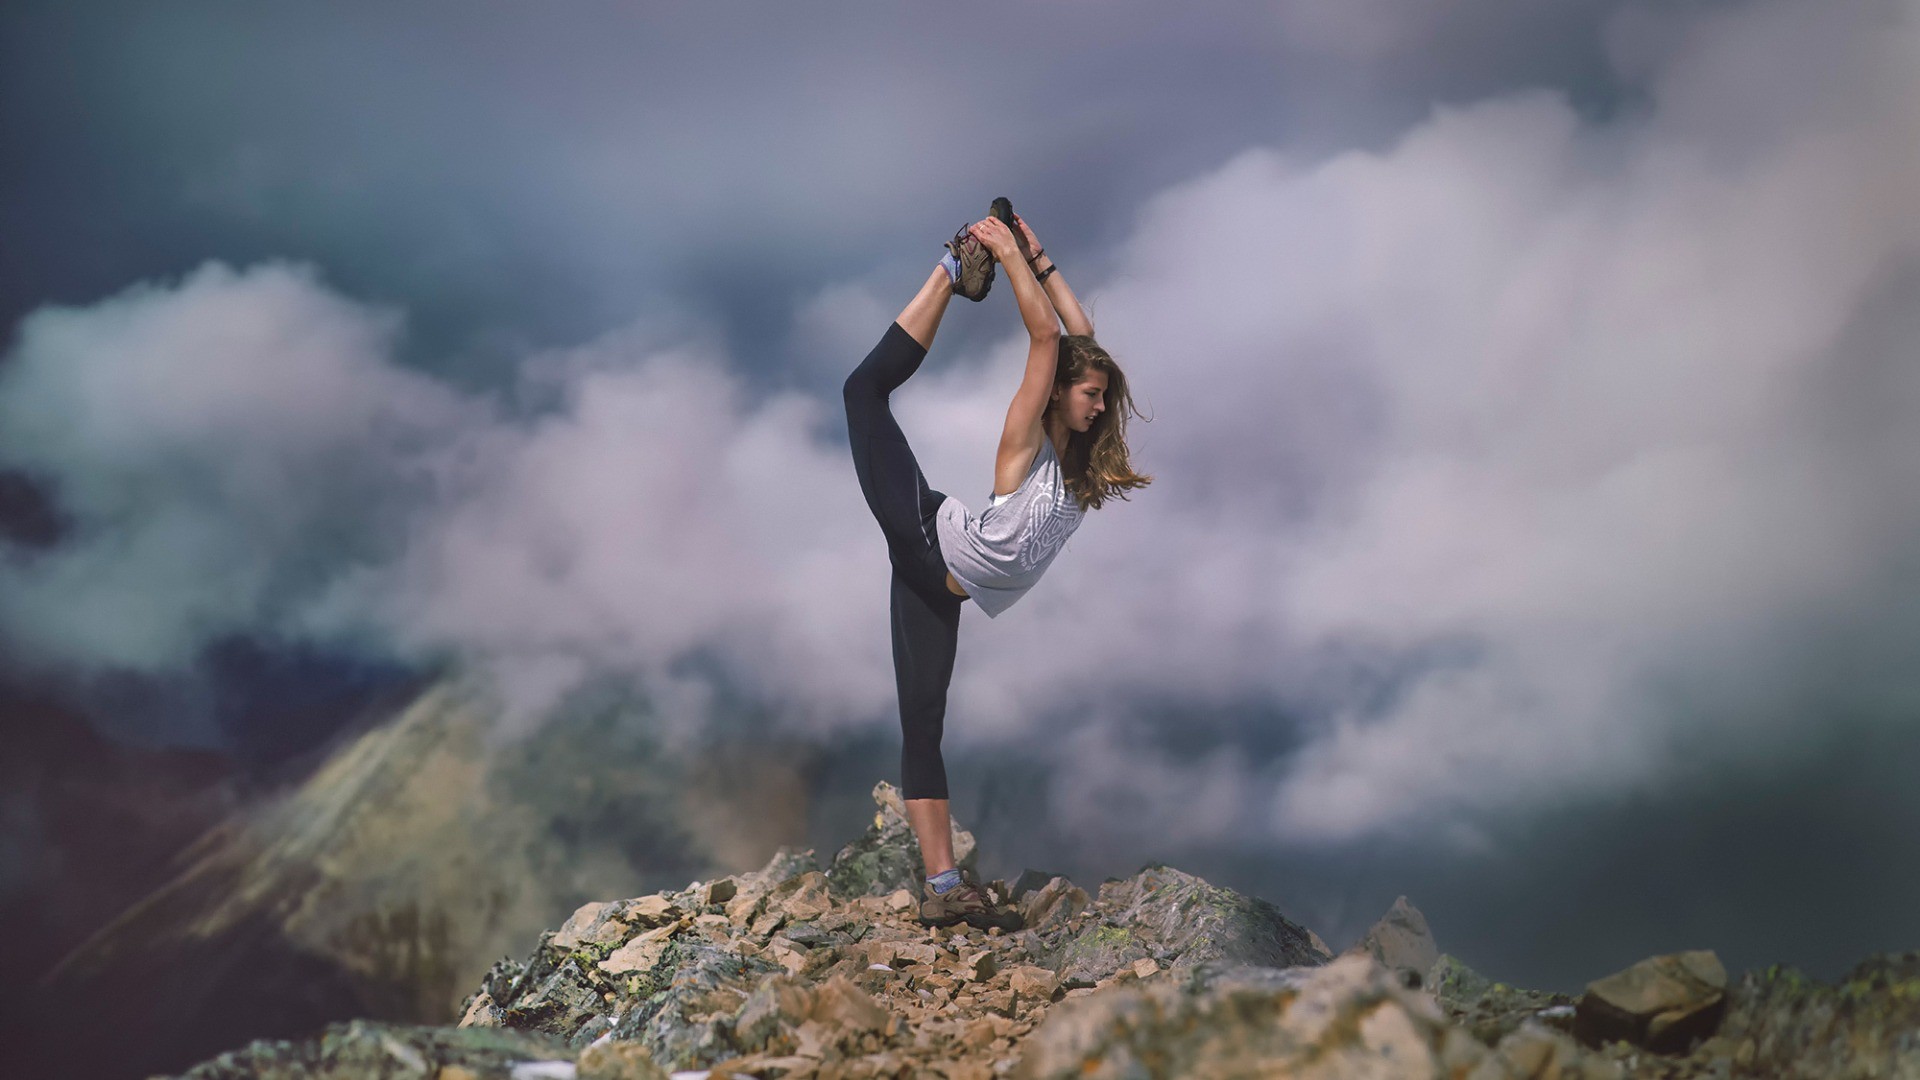 Girl Outdoors Mountain Hiking Fitness With Resolution - Yoga Wallpaper Iphone X , HD Wallpaper & Backgrounds